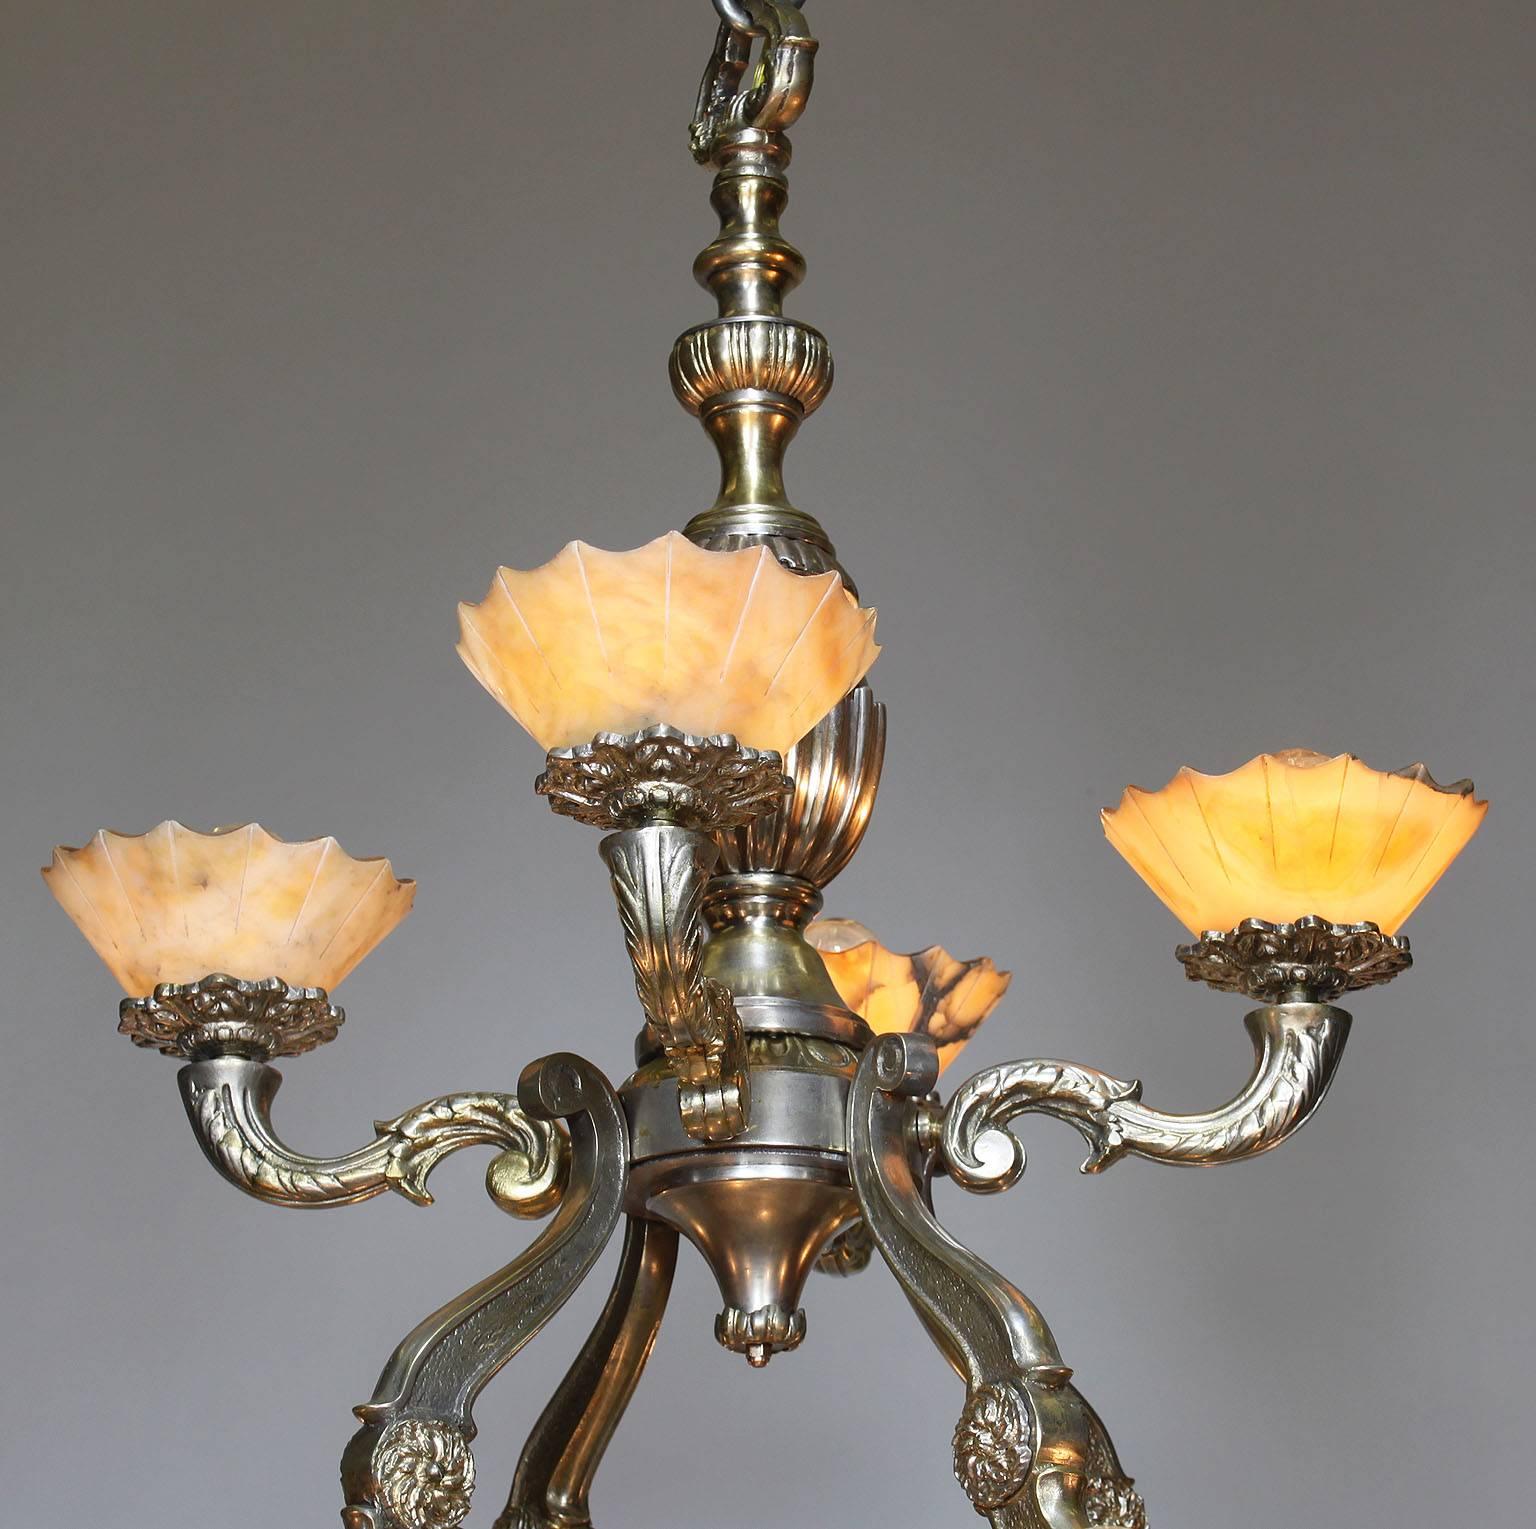 A French early 20th century Art Deco silvered bronze and carved veined Alabaster two-tier fourteen-light chandelier. The silver plated bronze frame with four upper tier scrolled lights and four pairs of scrolled lower tier lights, all surmounted